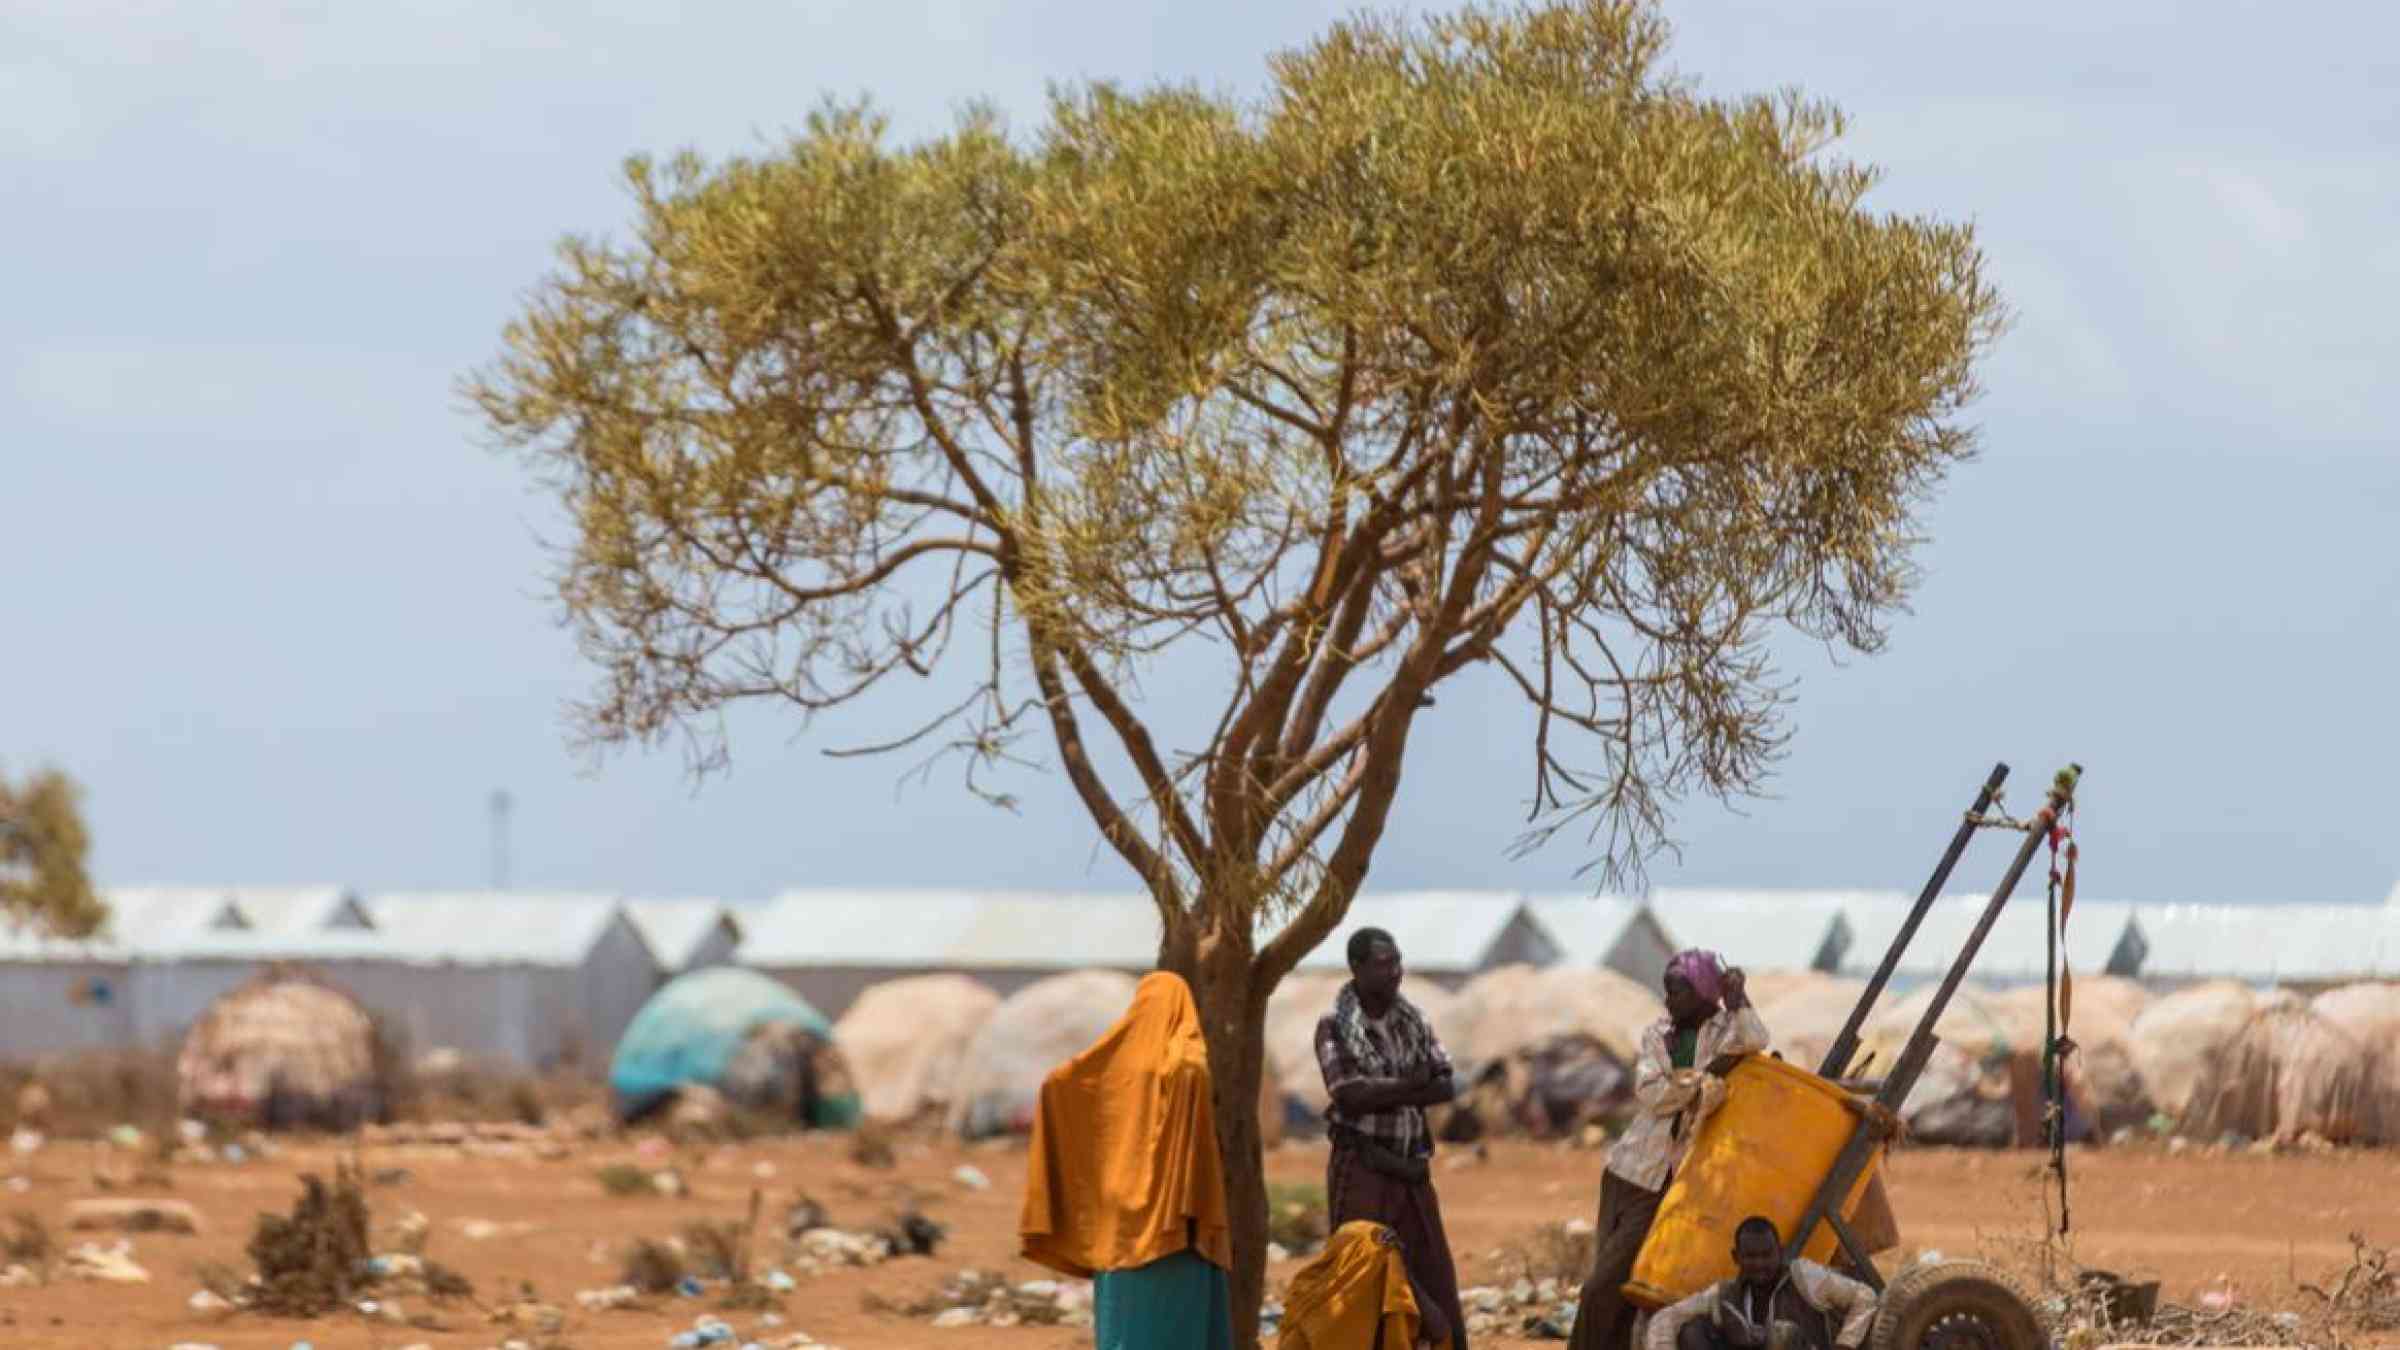 People who carry water rest under a tree in a refugee camp, Baidoa, Somalia. Amors photos/Shutterstock